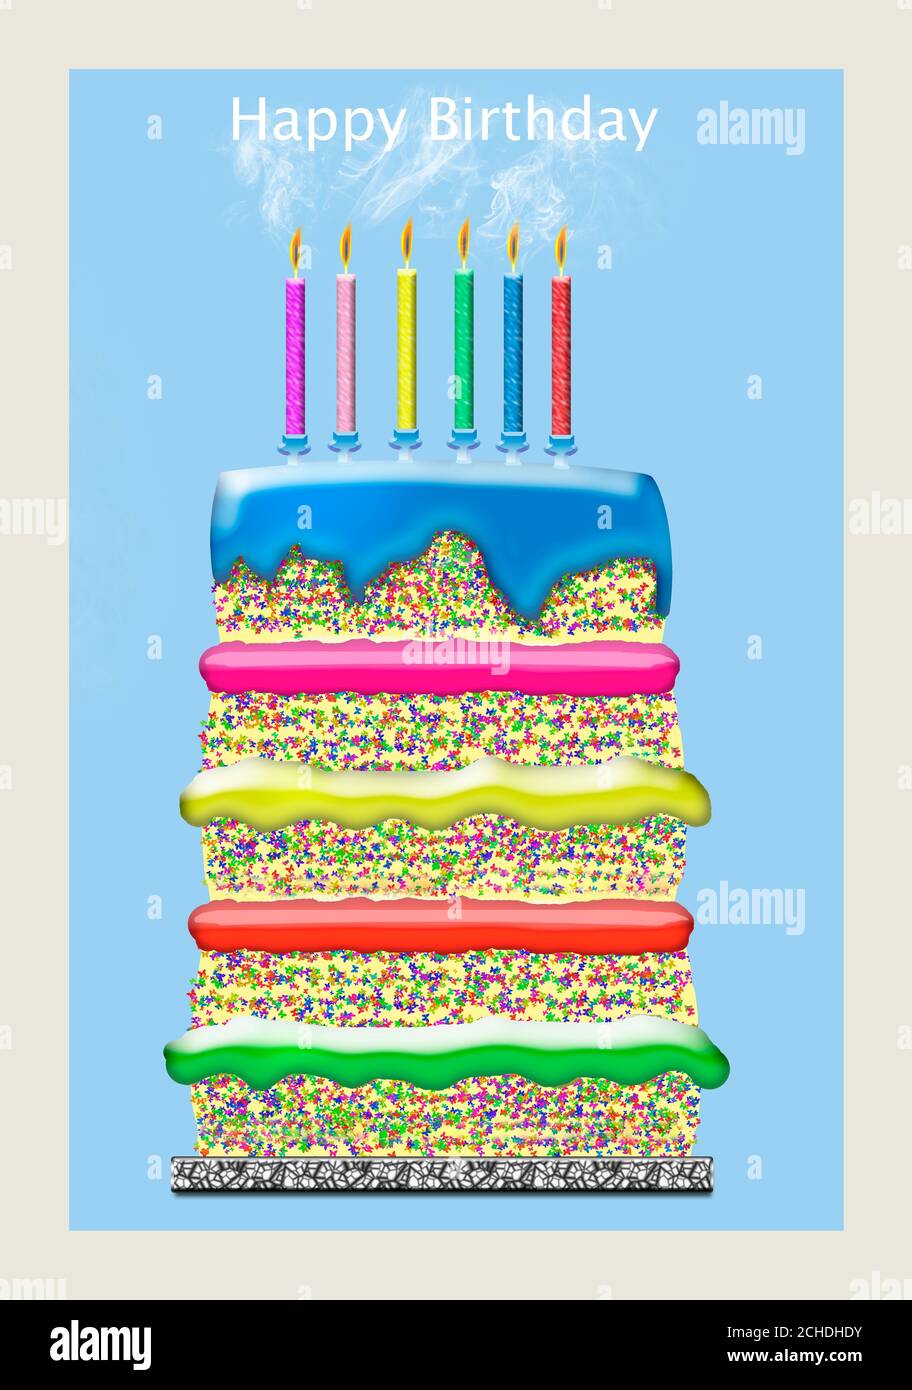 Birthday cake card design digital art illustration tall multi layered cake with 4 jam layers in green orange yellow and red blue icing 6 candles smoke Stock Photo